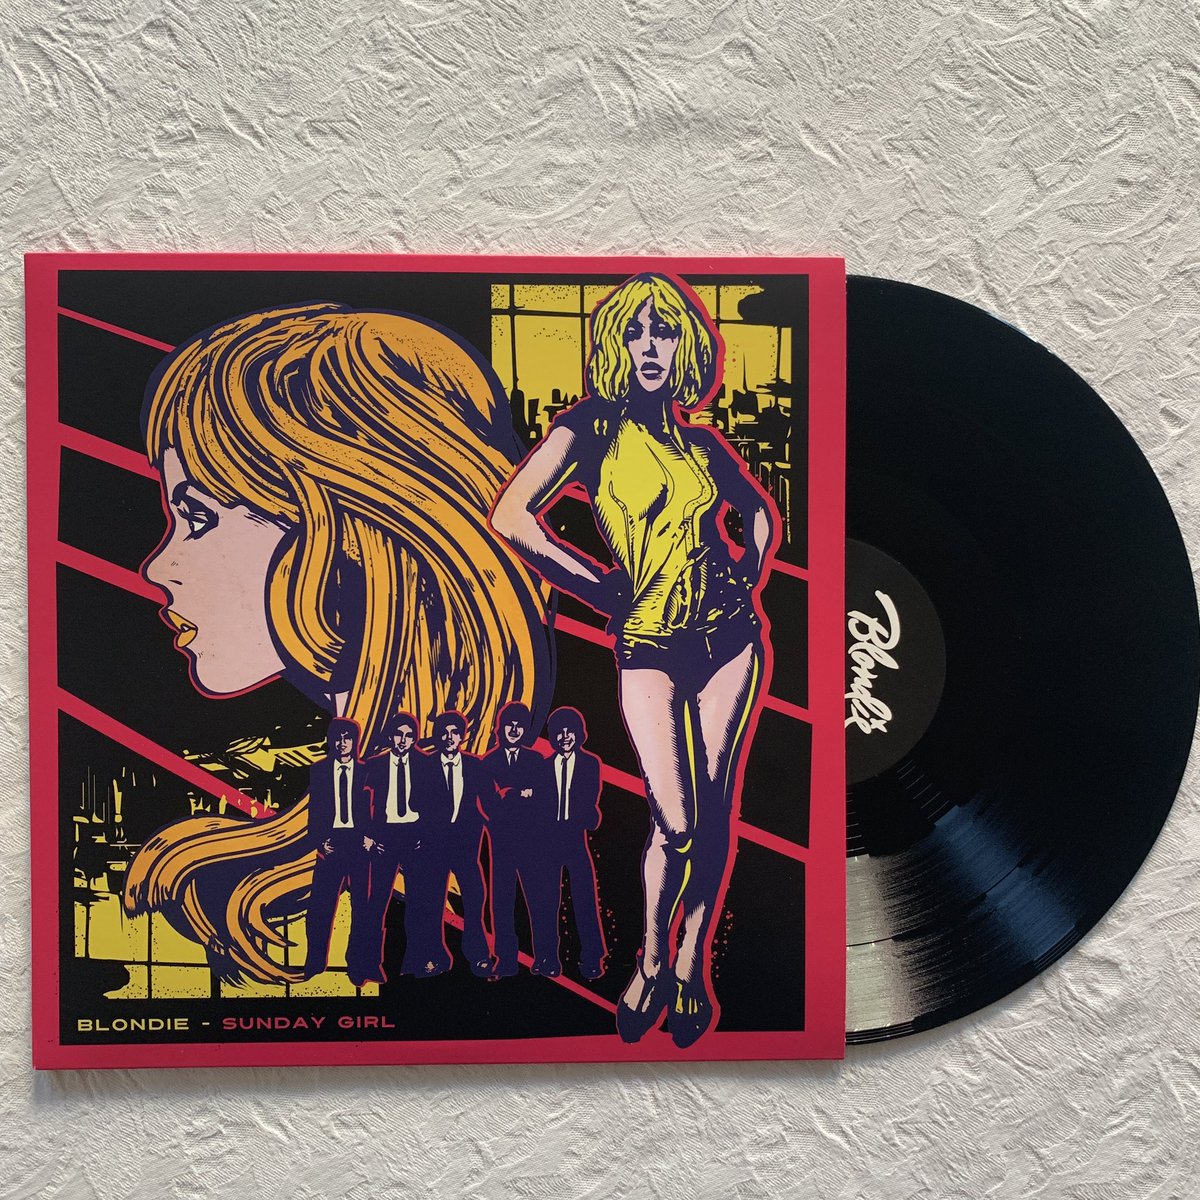 Well this superb @BlondieOfficial #AgainstTheOdds graphic novel was well worth the wait! Amazing artwork, prints, and Sunday Girl EP. Thank you Mrs P for such an amazing b-day gift.
Blondie is a group!